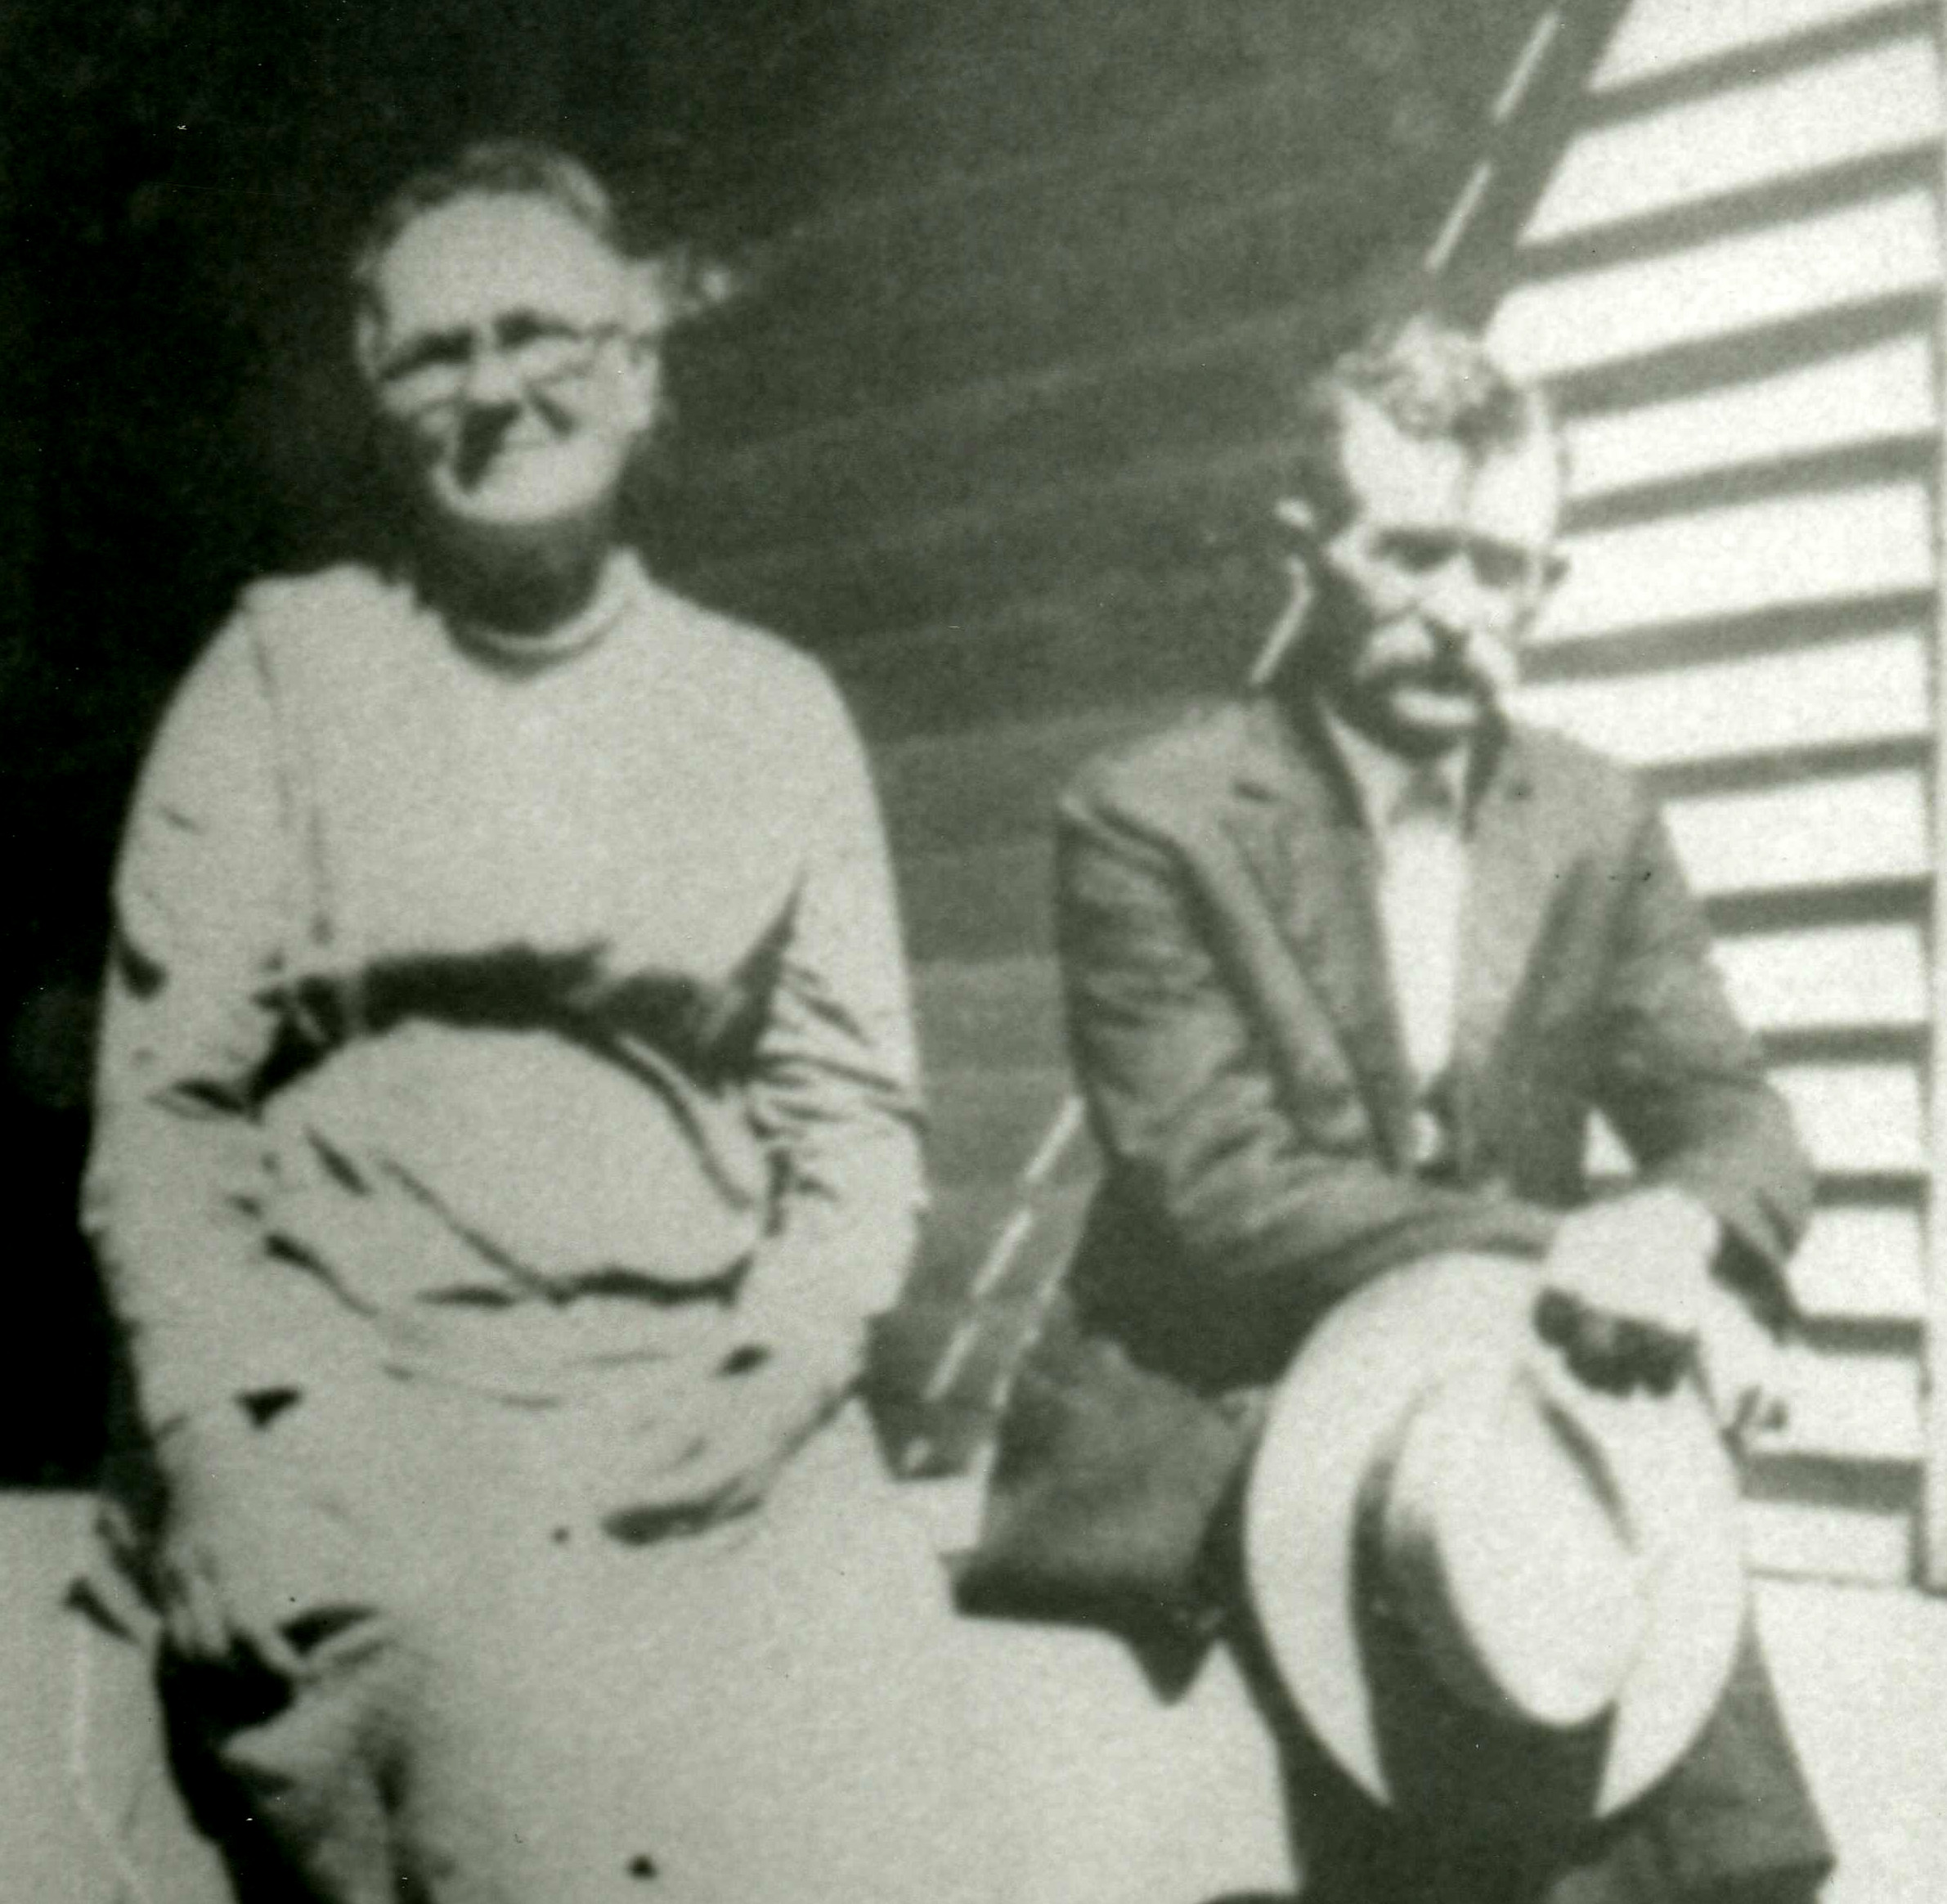 Alvina and August Franz